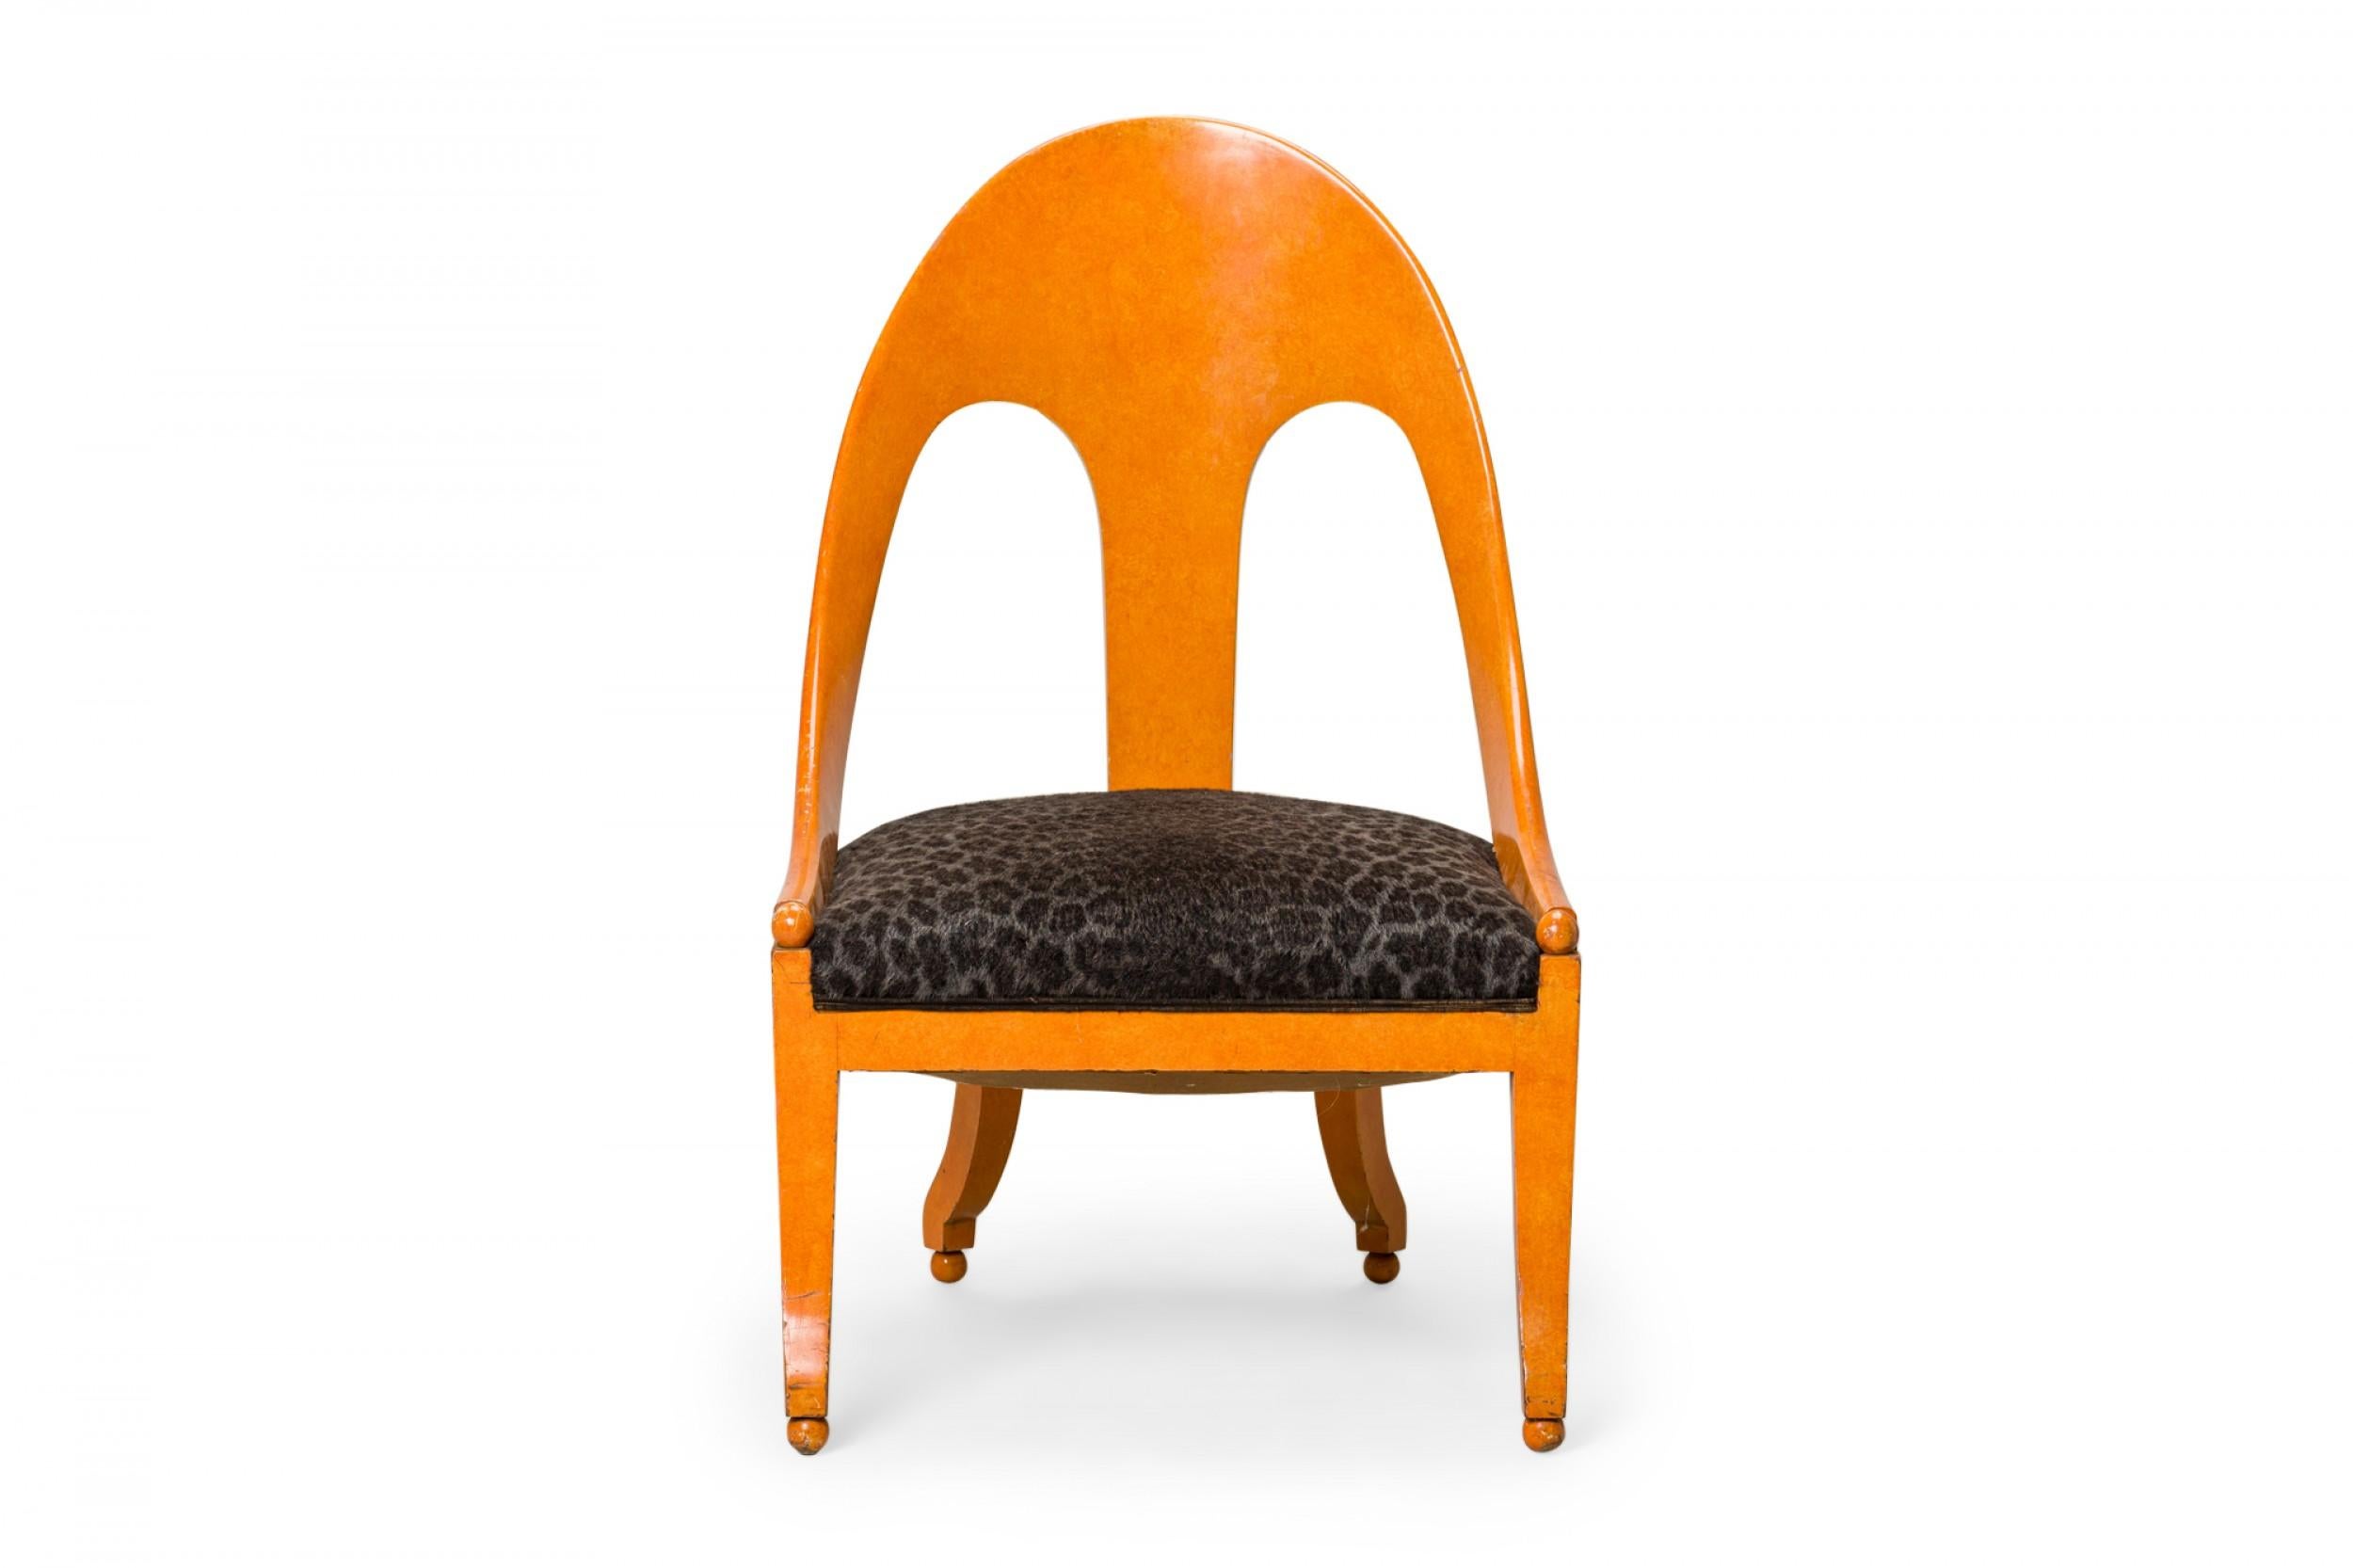 PAIR of American Mid-Century spoon back side / pull up chairs with orange lacquered wooden frames and black leopard print upholstered seats, resting on four square curved legs ending in ball feet. (PRICED AS PAIR)(Similar pieces: DUF0428-DUF0431)